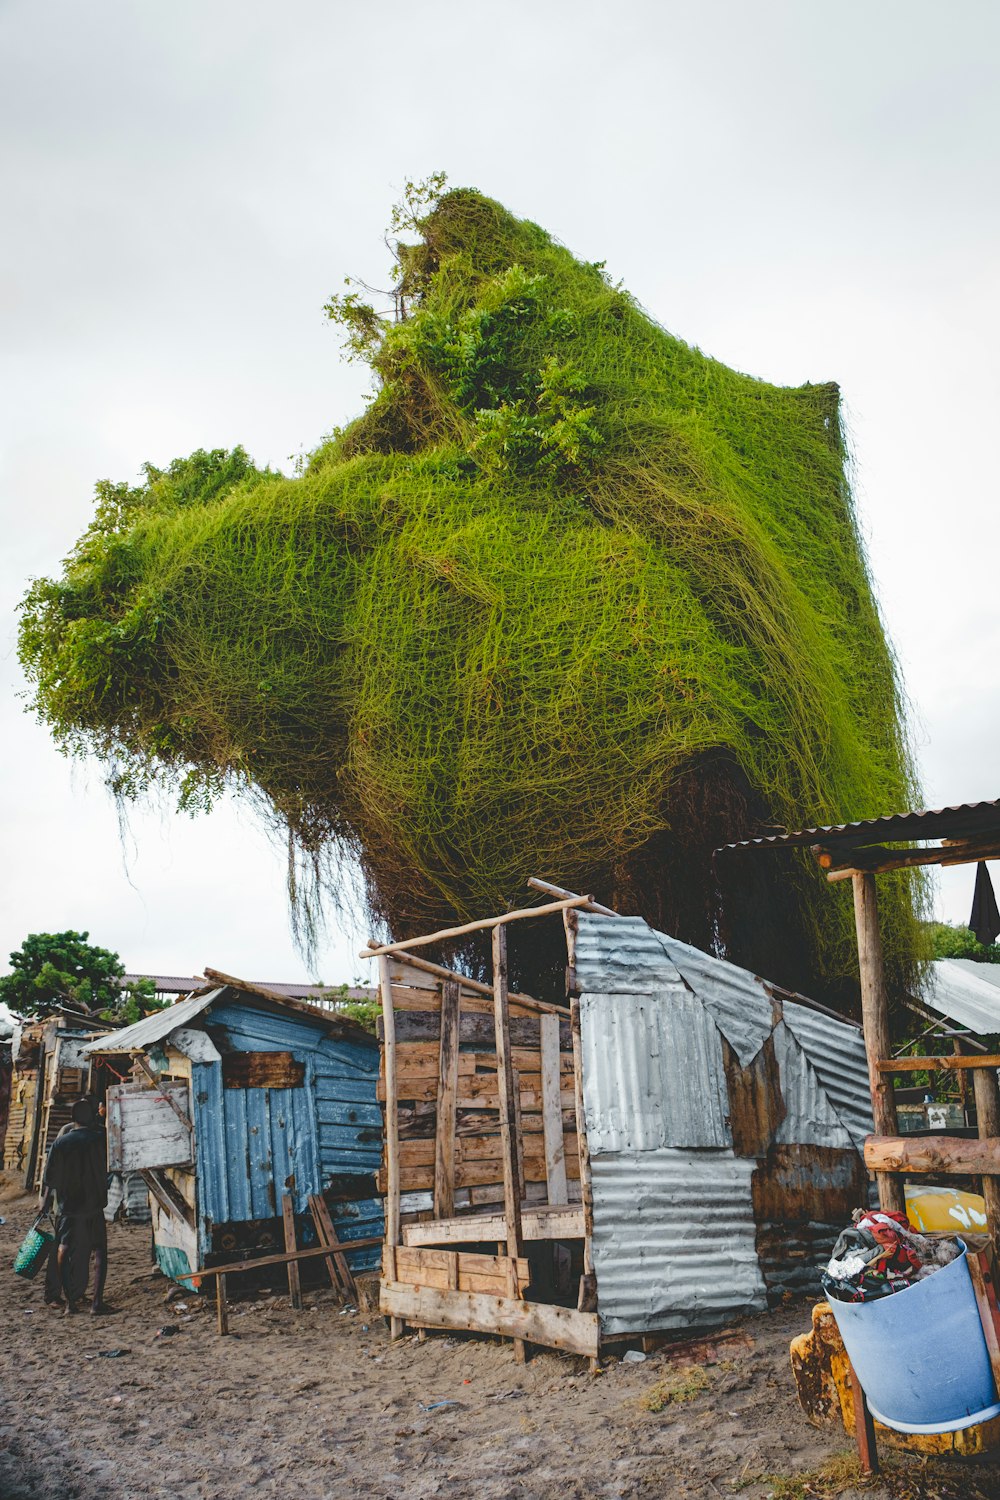 a group of shacks covered in green moss